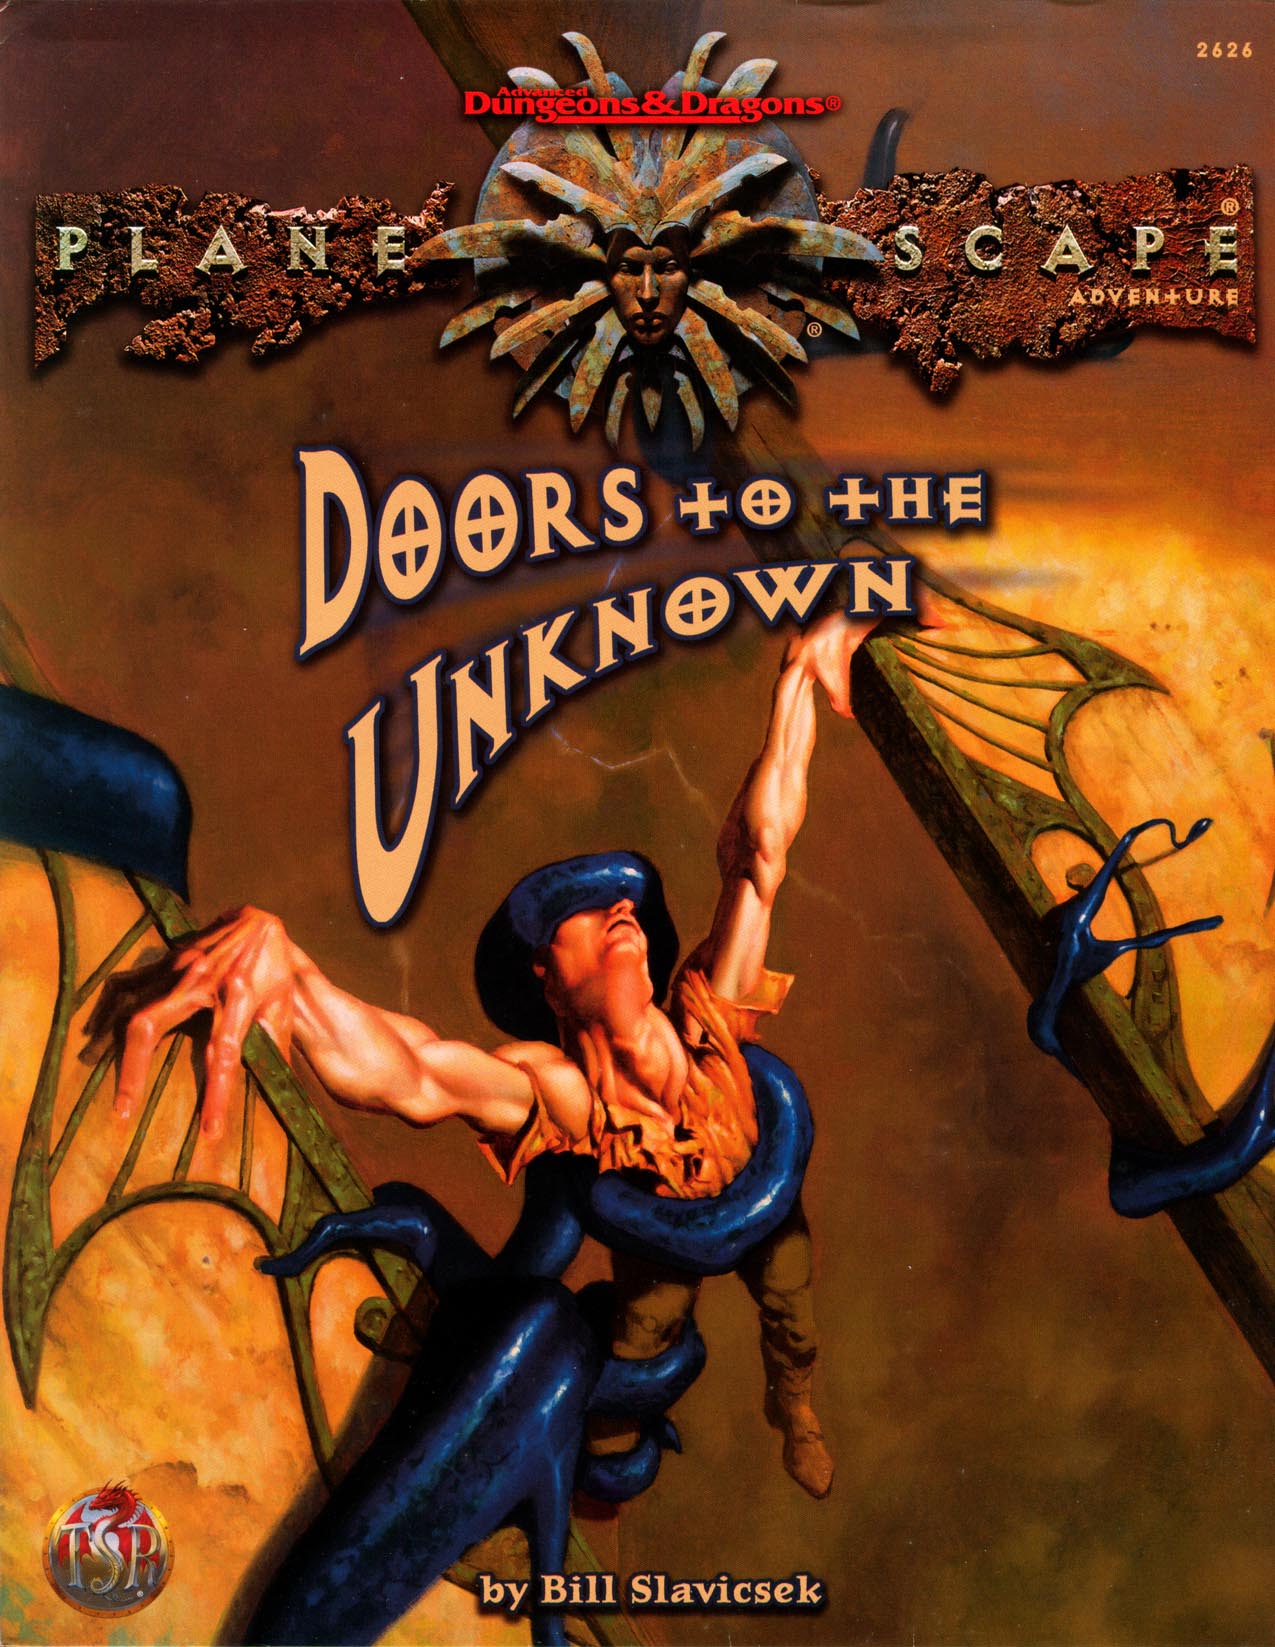 Doors to the UnknownCover art